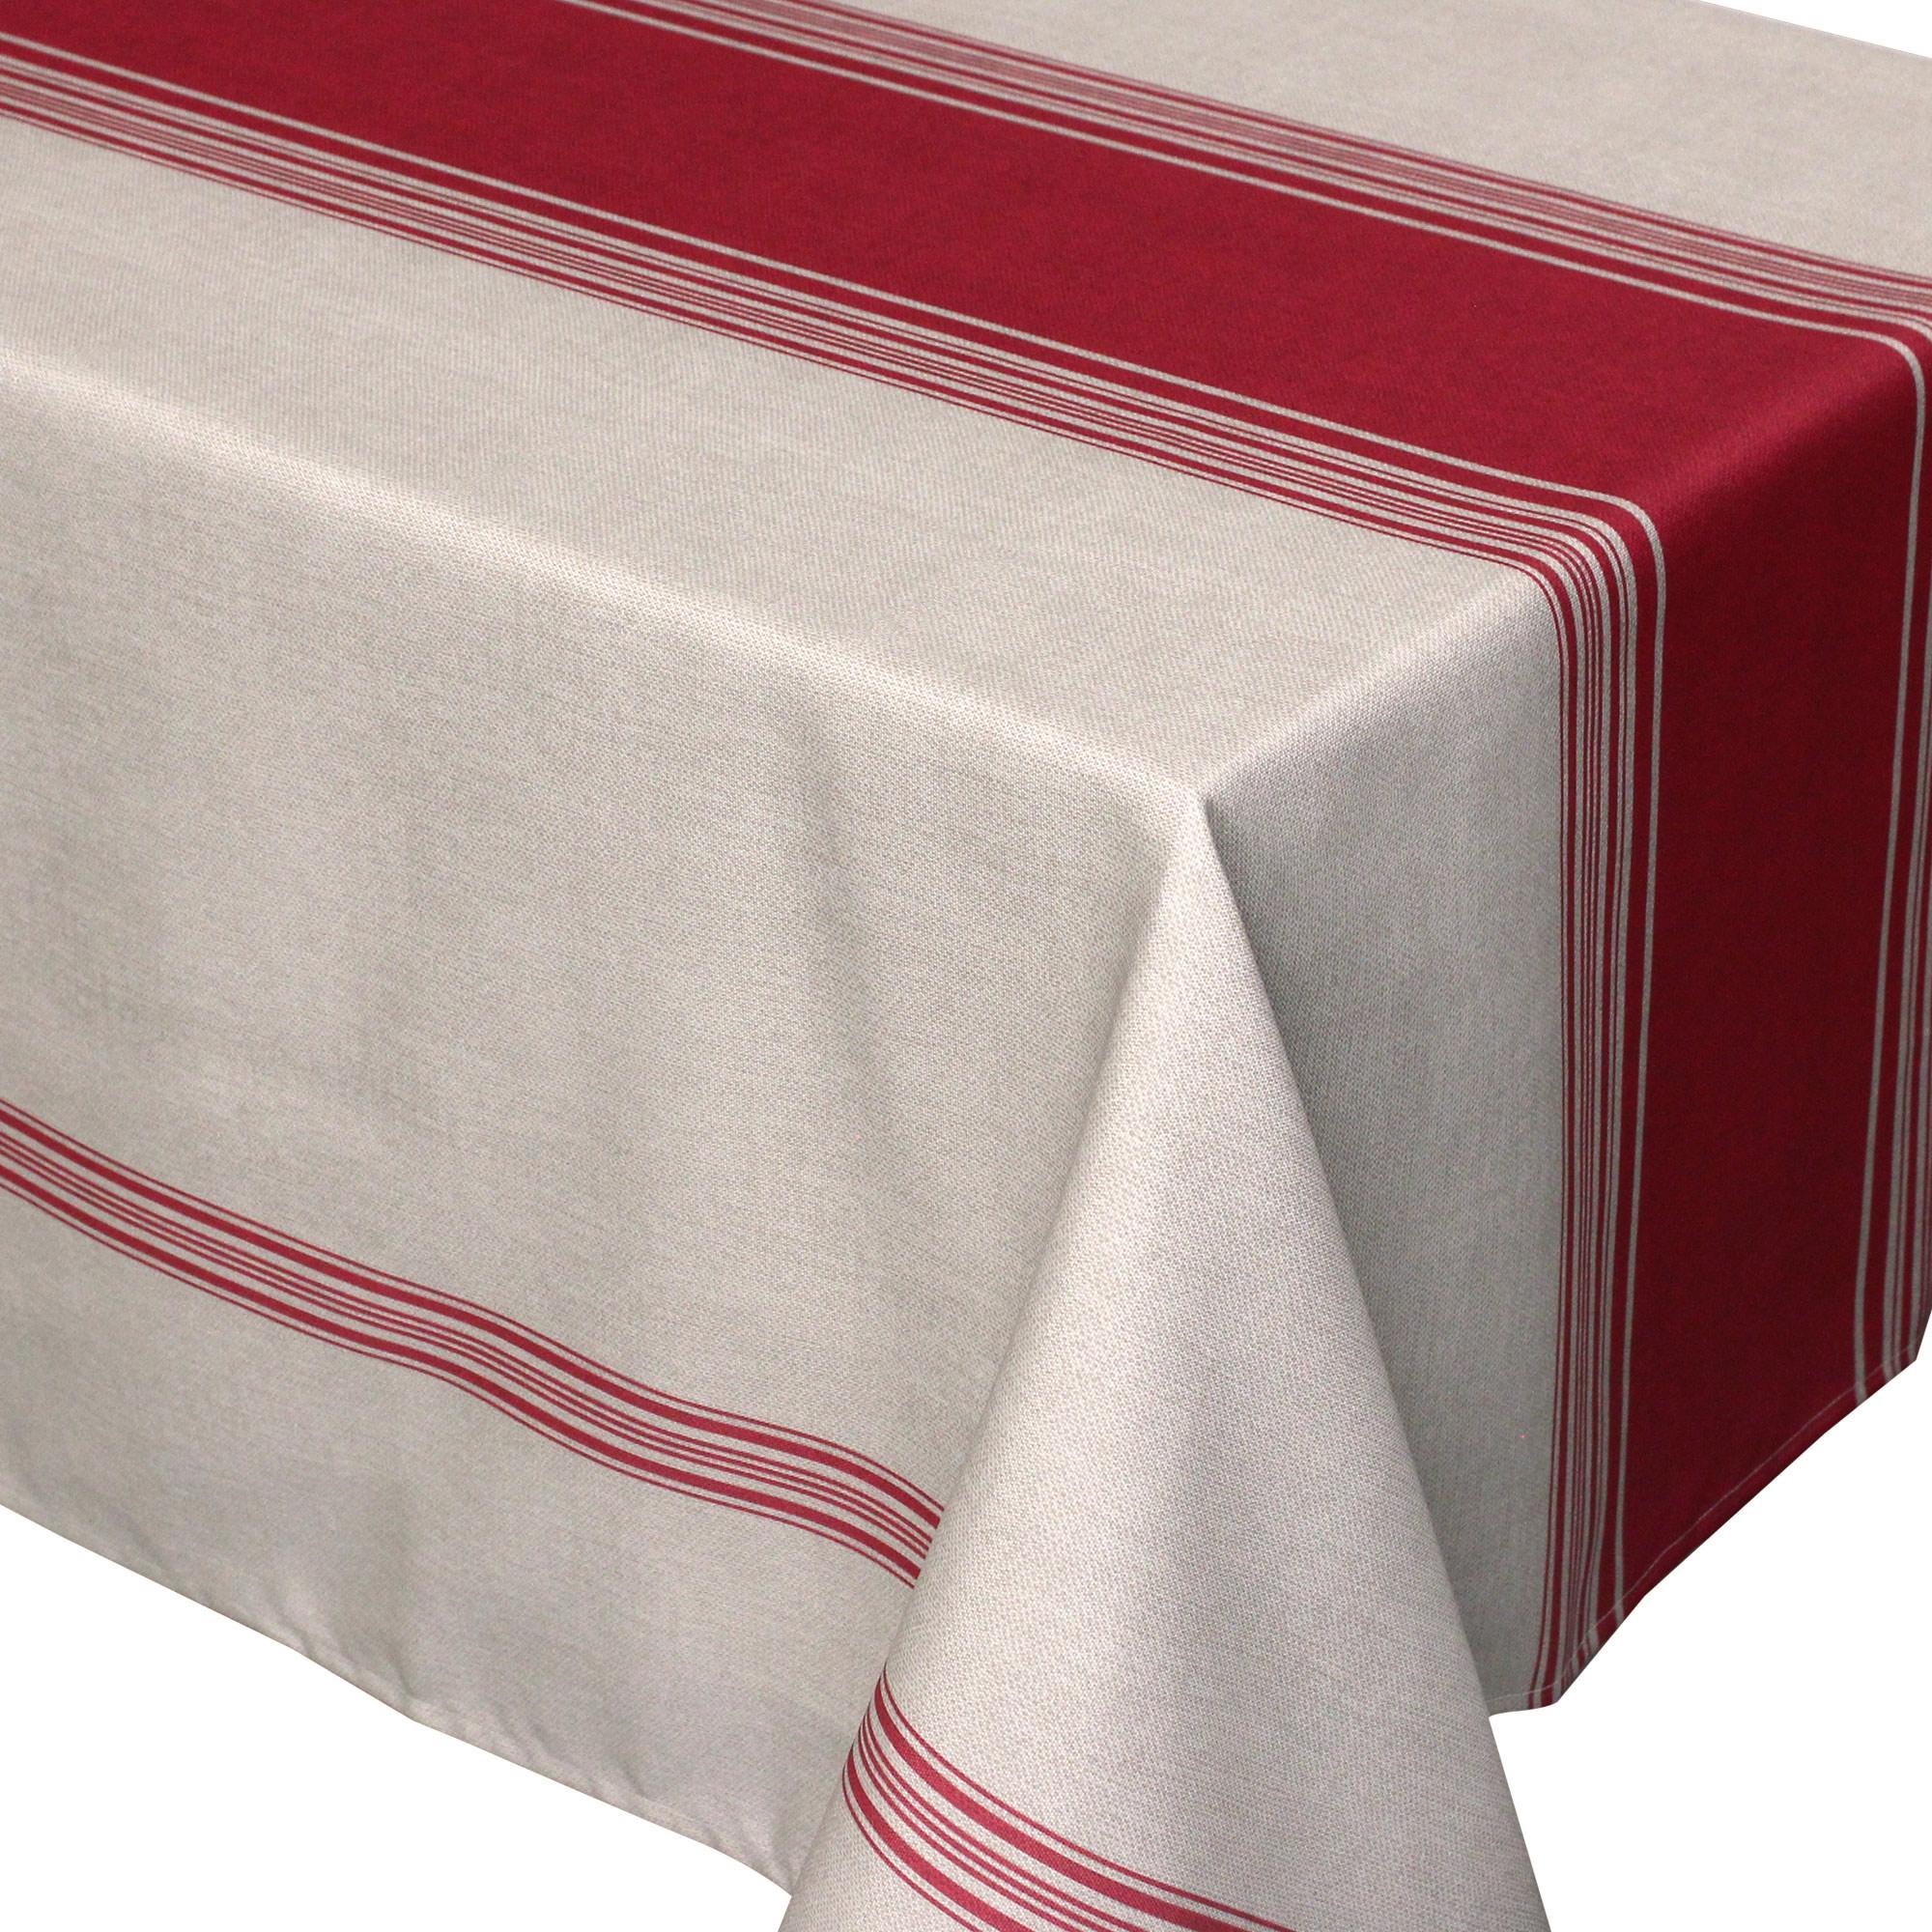 Nappe Carree Cm Polyester pas cher - Achat neuf et occasion